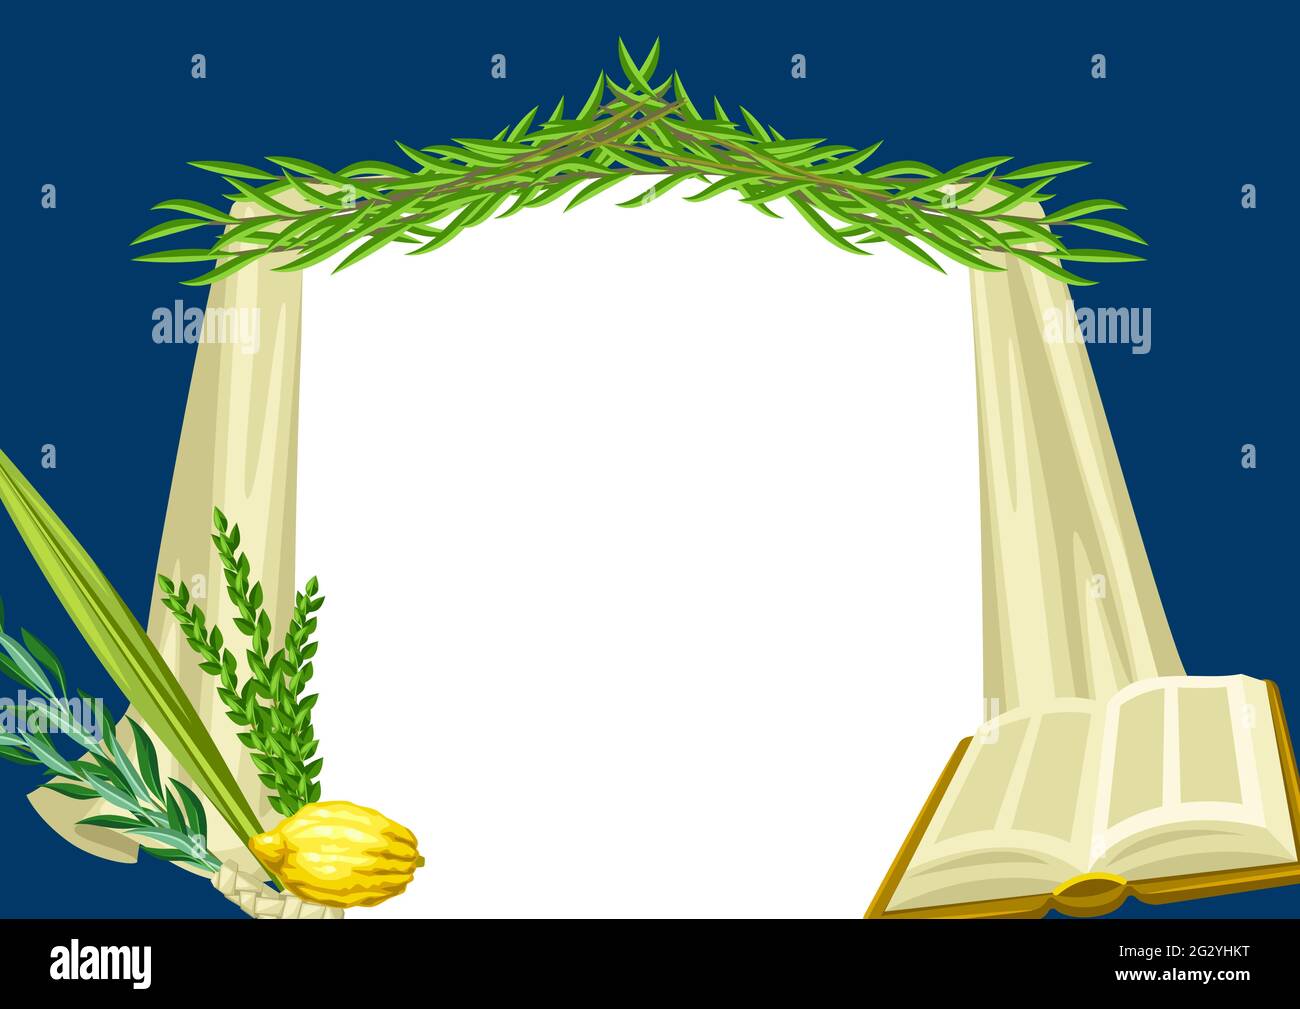 Happy Sukkot greeting card. Holiday background with Jewish festival traditional symbols. Stock Vector